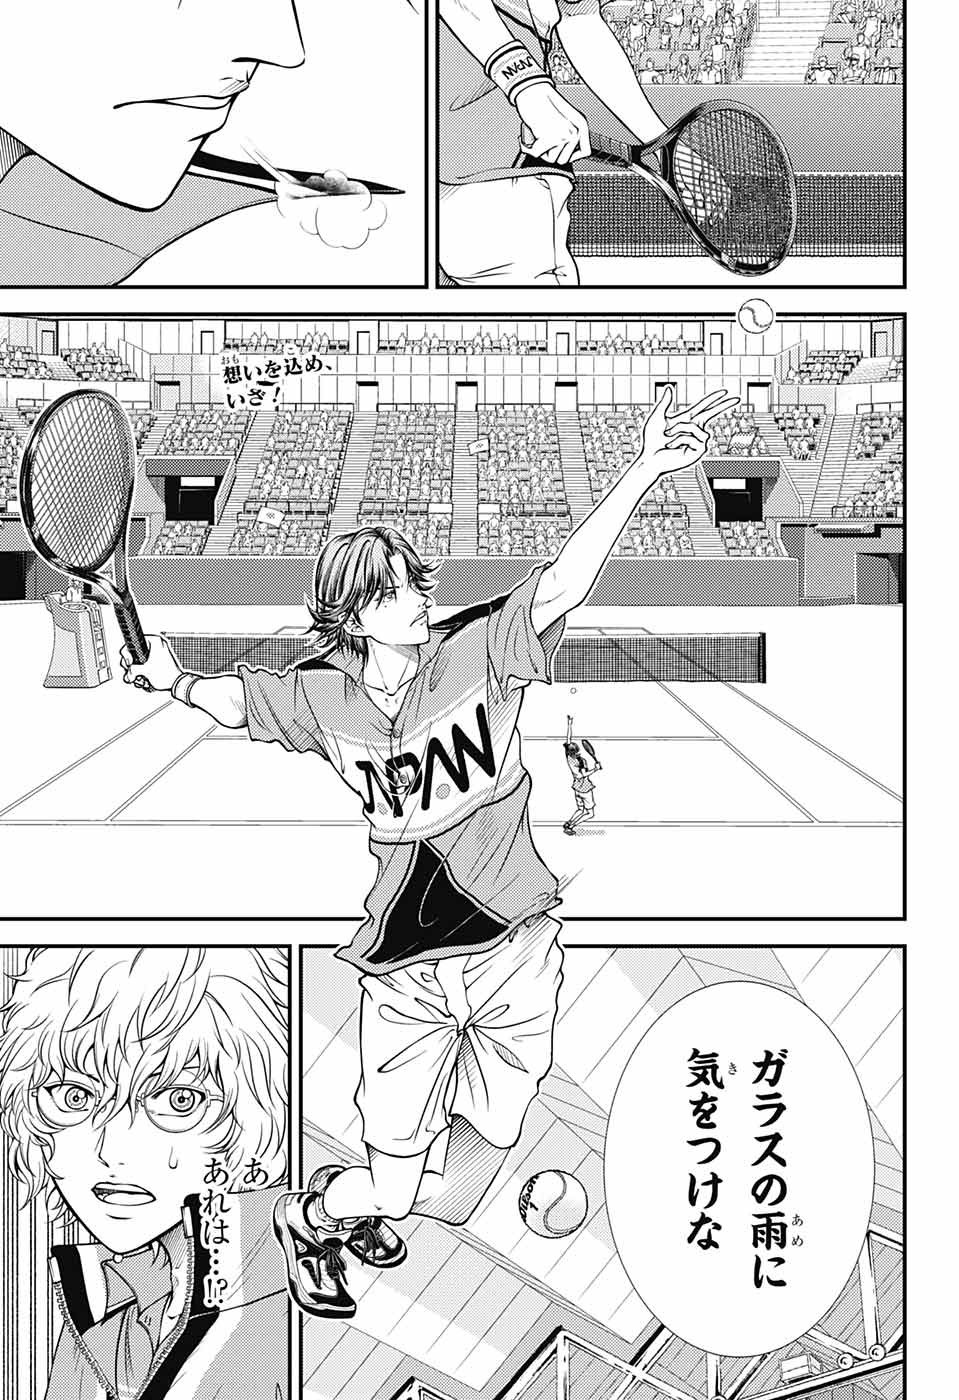 Shin Prince of Tennis - Chapter 390 - Page 1